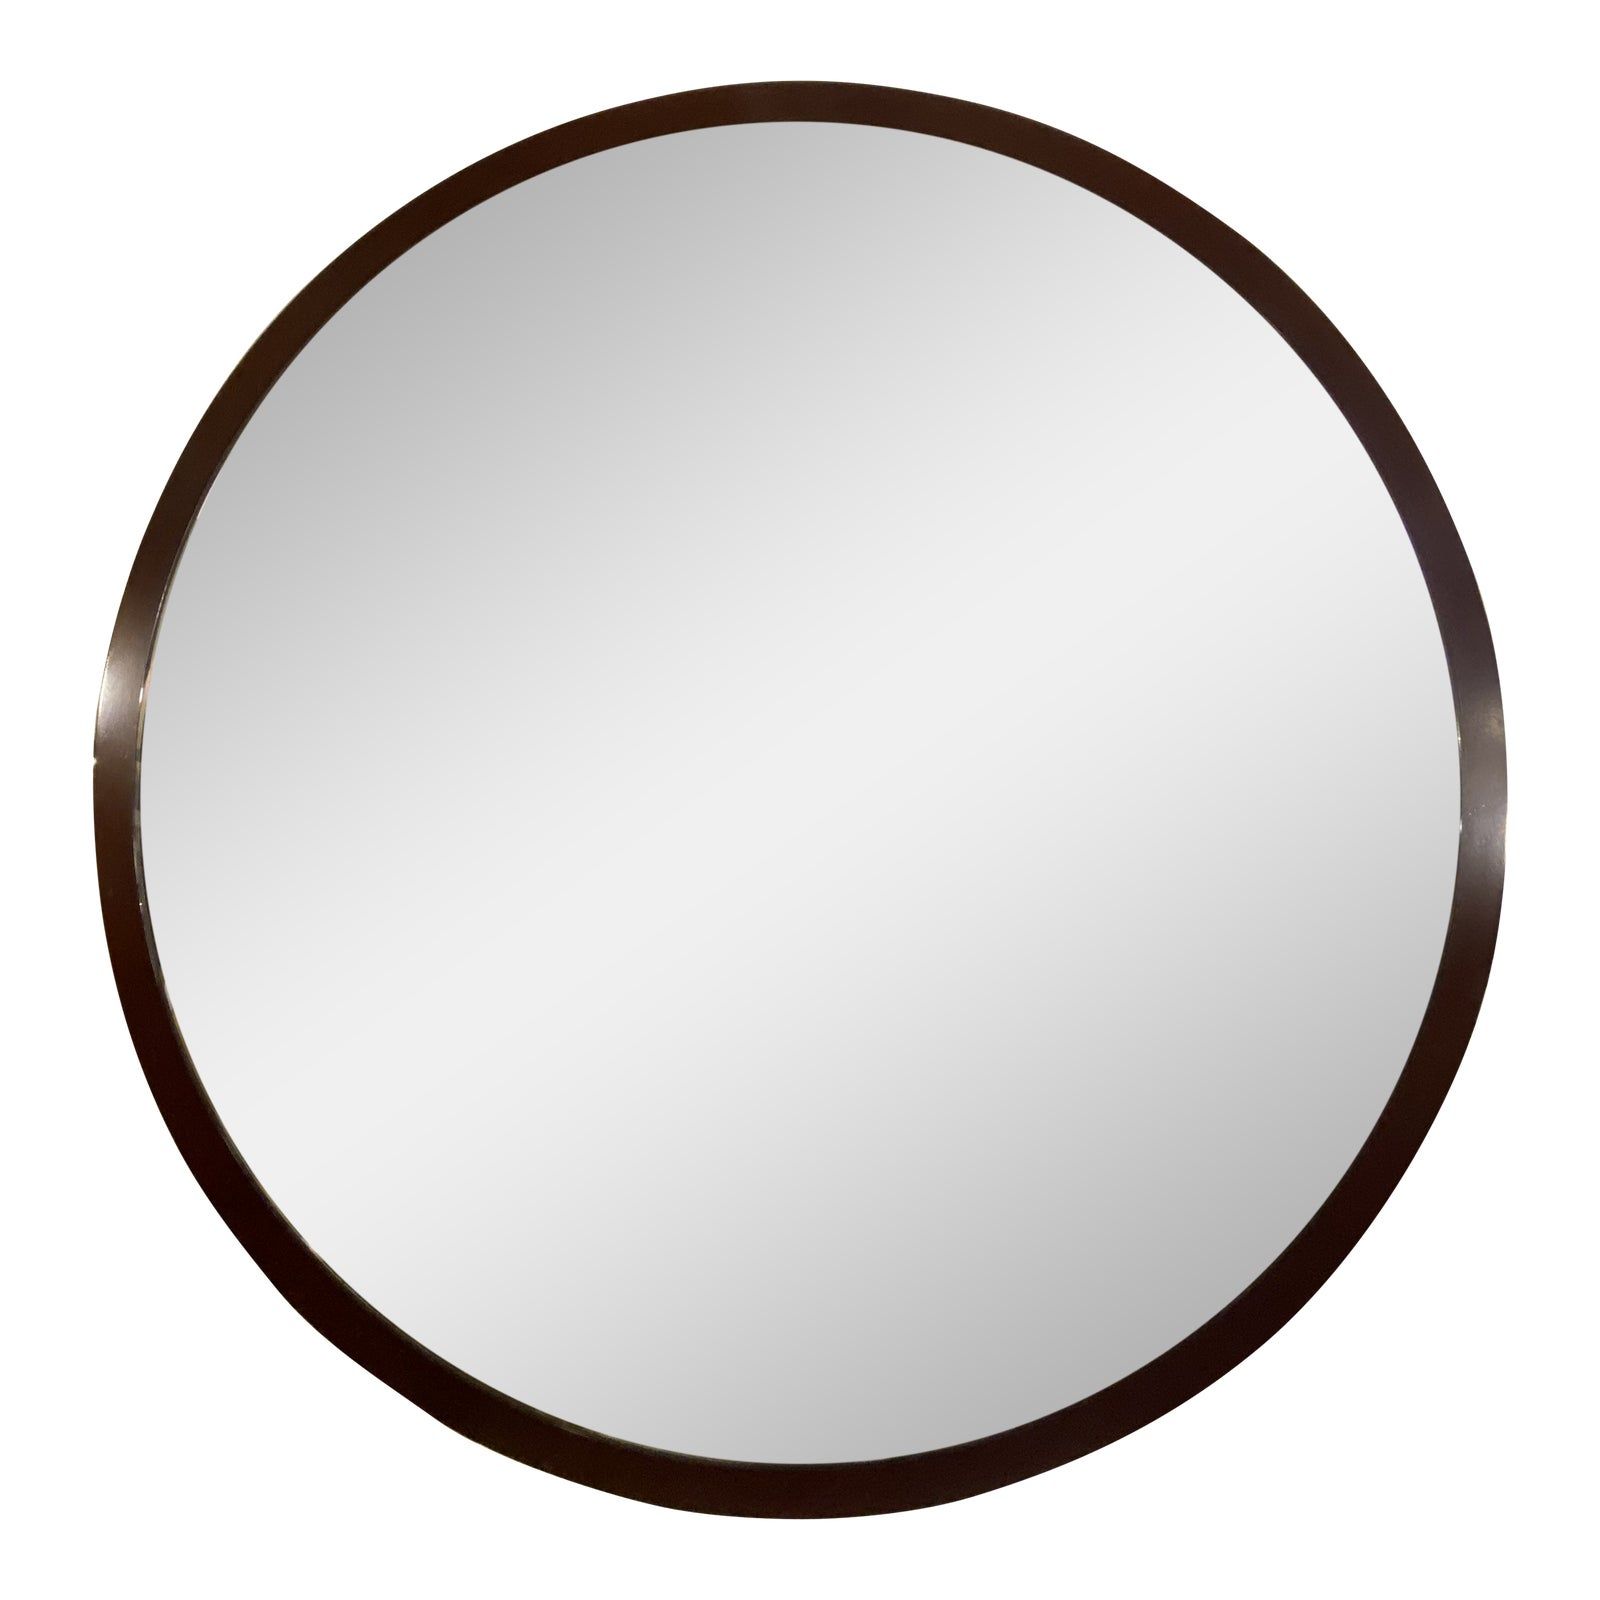 Crate & Barrel Contemporary Round Wood Wall Mirror | Design Plus Gallery Throughout Round Modern Wall Mirrors (View 10 of 15)